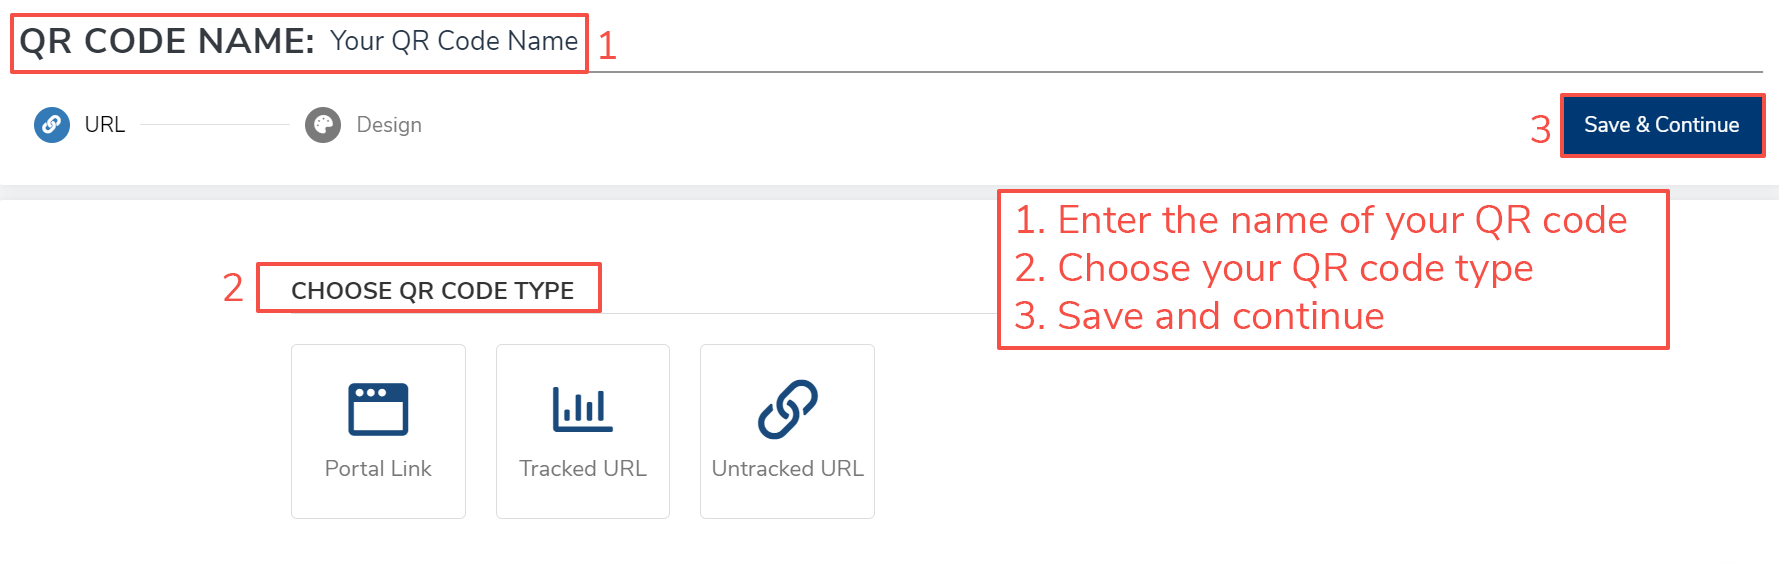 This screenshot shows the steps described above and below. 1. Enter the name of your QR code in the top field. 2. Choose your QR code type. 3. Click Save & Continue at the top right.